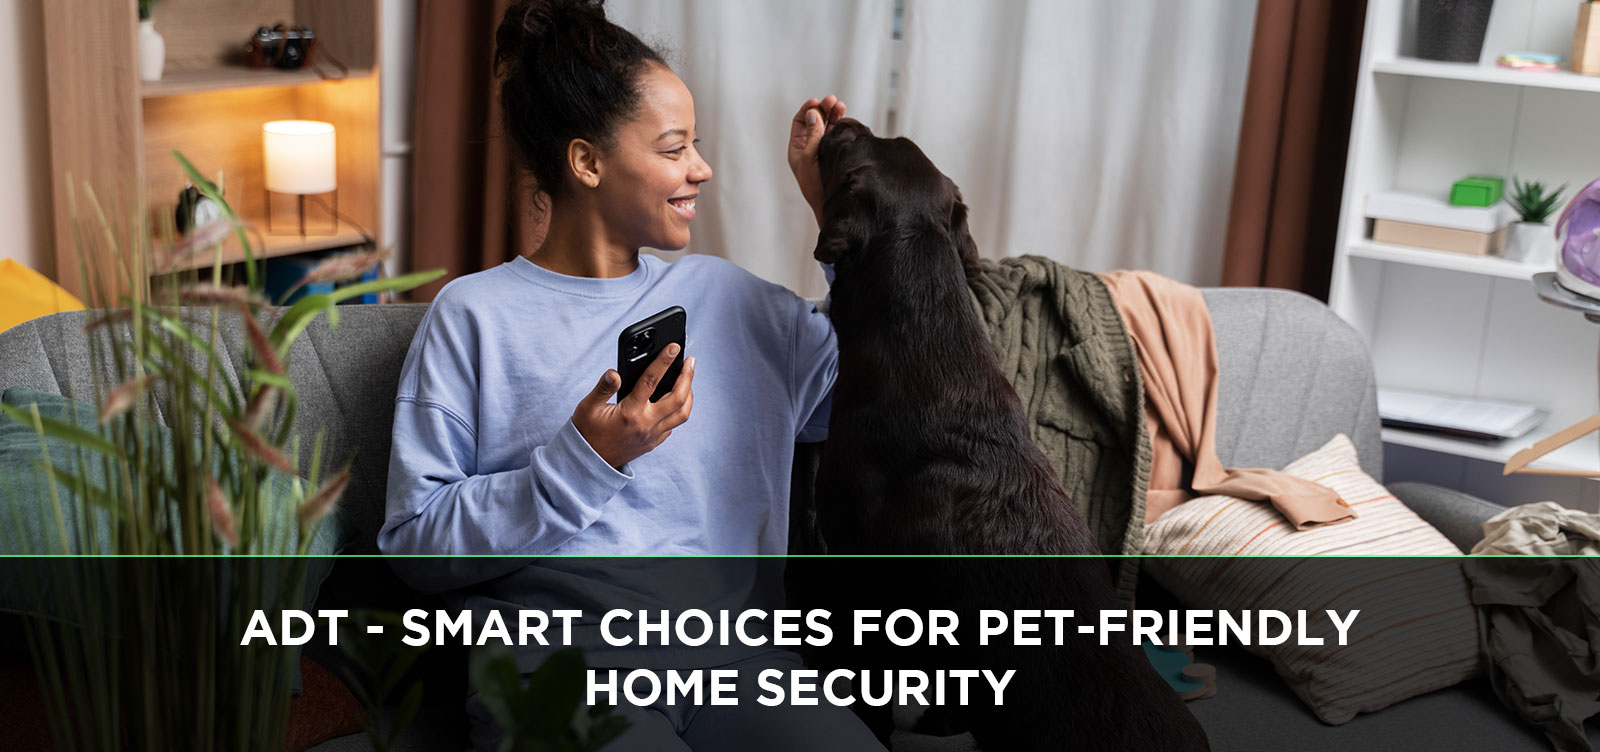 ADT - Smart Choices for Pet-Friendly Home Security